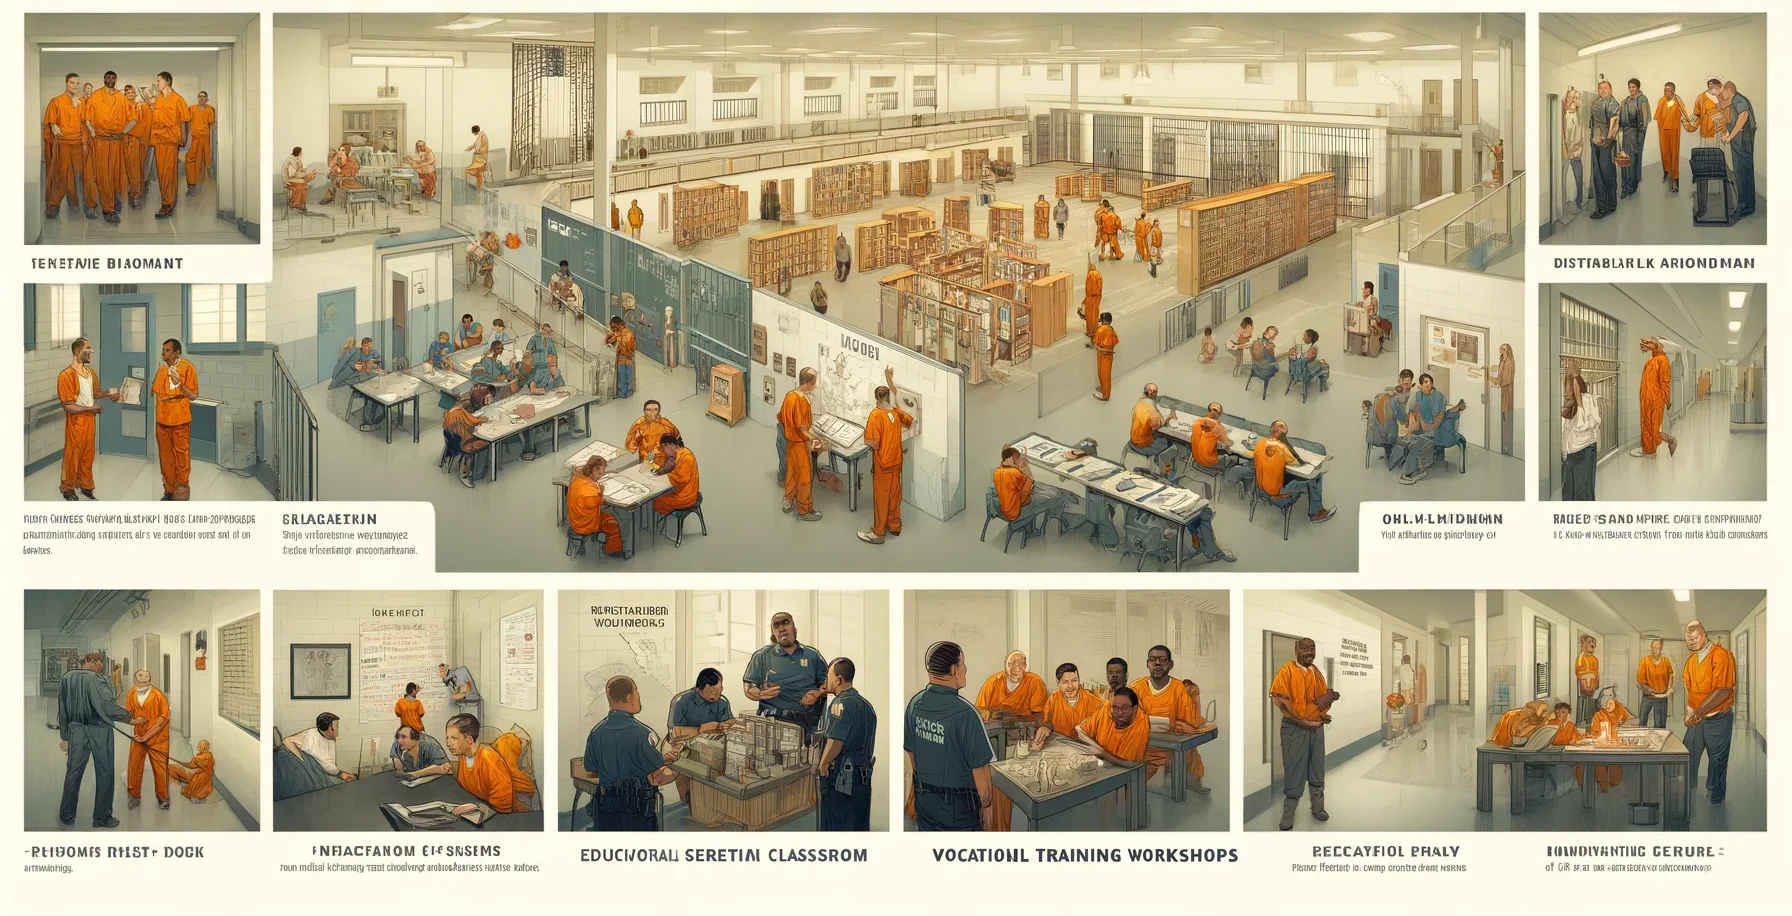 Illustration of inmate services and programs at Los Angeles Pitchess South Facility, featuring educational and vocational activities in a rehabilitative environment.